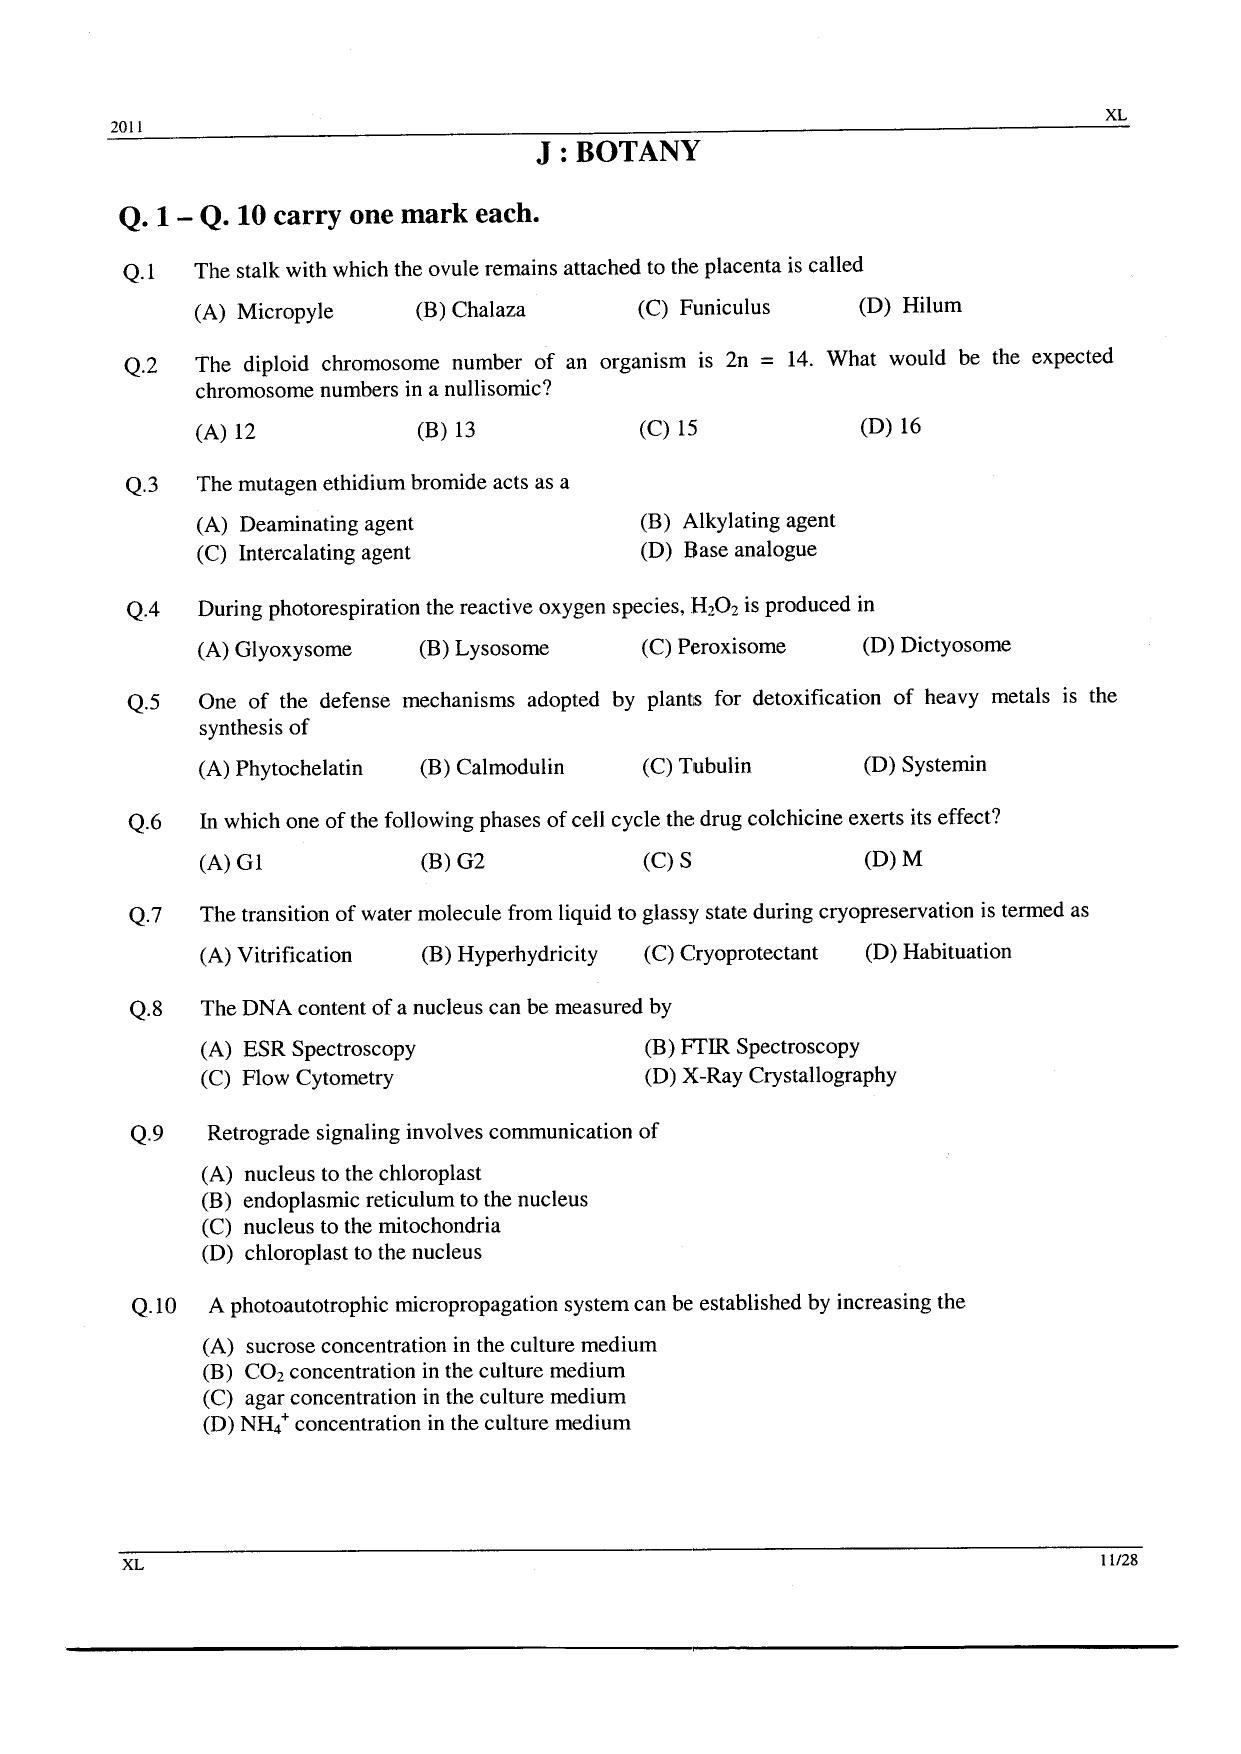 GATE 2011 Life Sciences (XL) Question Paper with Answer Key - Page 11